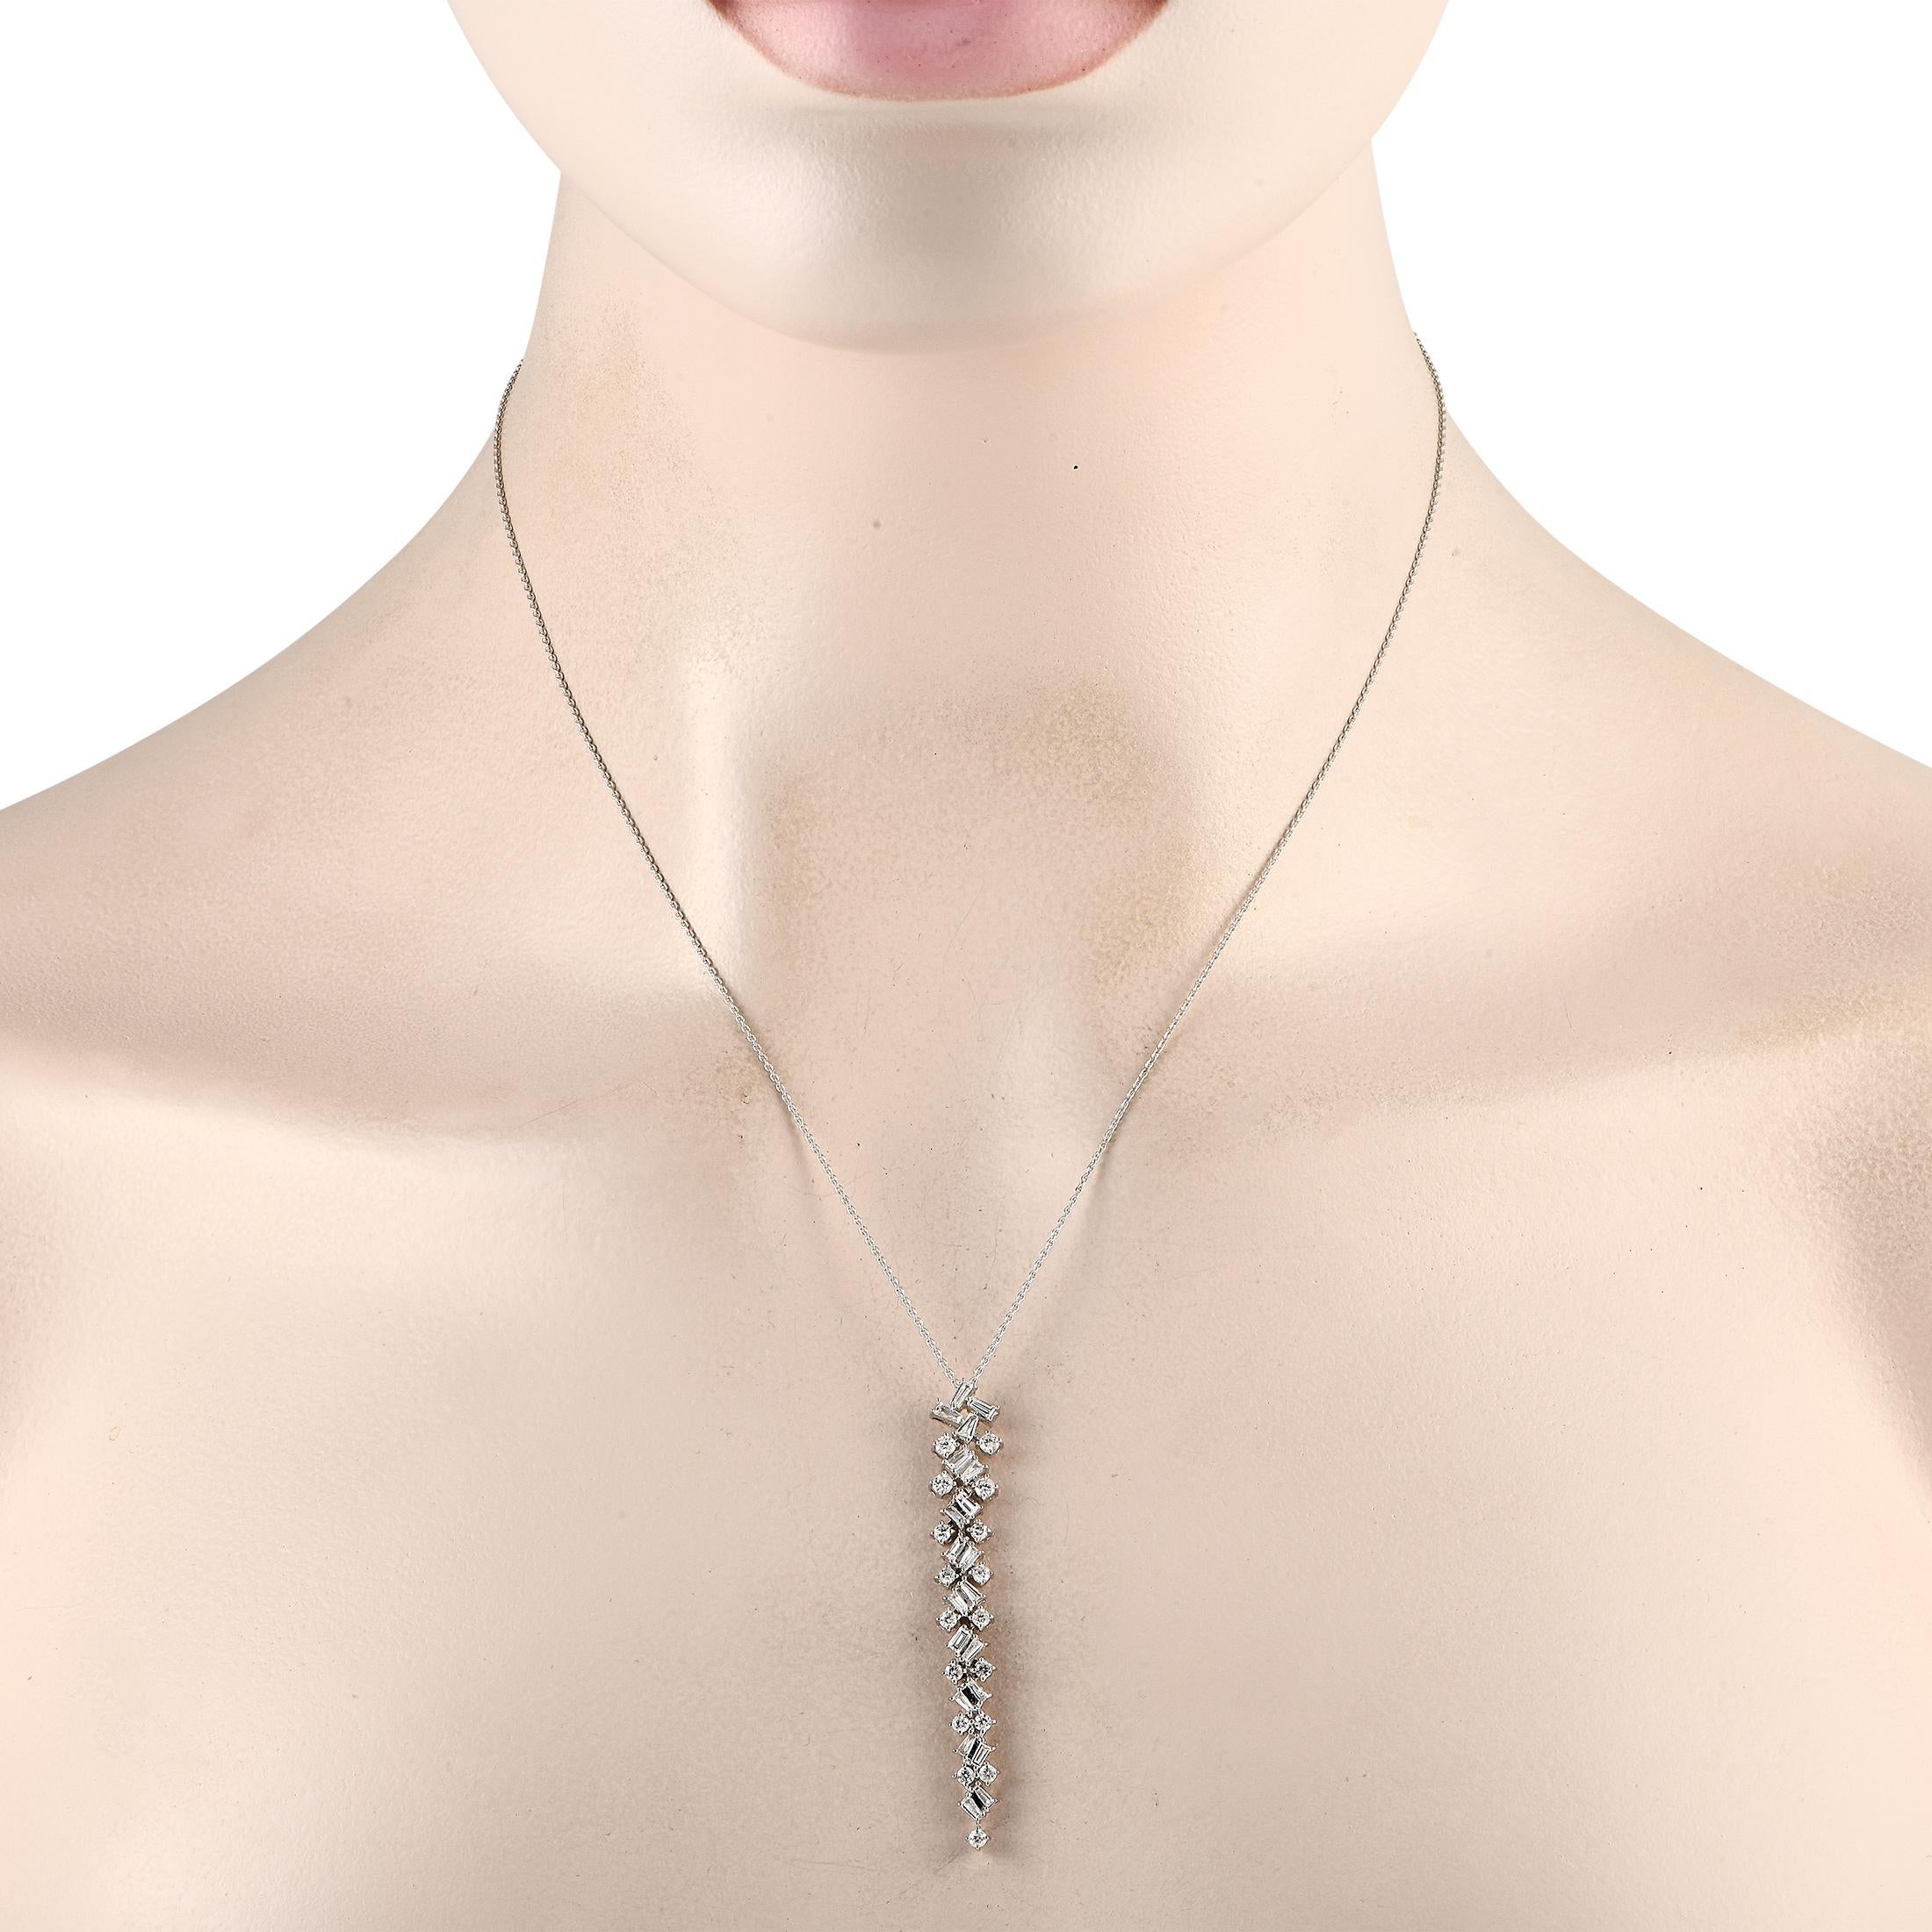 A dazzling array of Diamonds with a total weight of 1.0 carats make this luxury necklace instantly captivating. This pieces breathtaking 14K White Gold pendant is suspended from a 20 chain and measures 2.10 long by 0.25 wide.This jewelry piece is